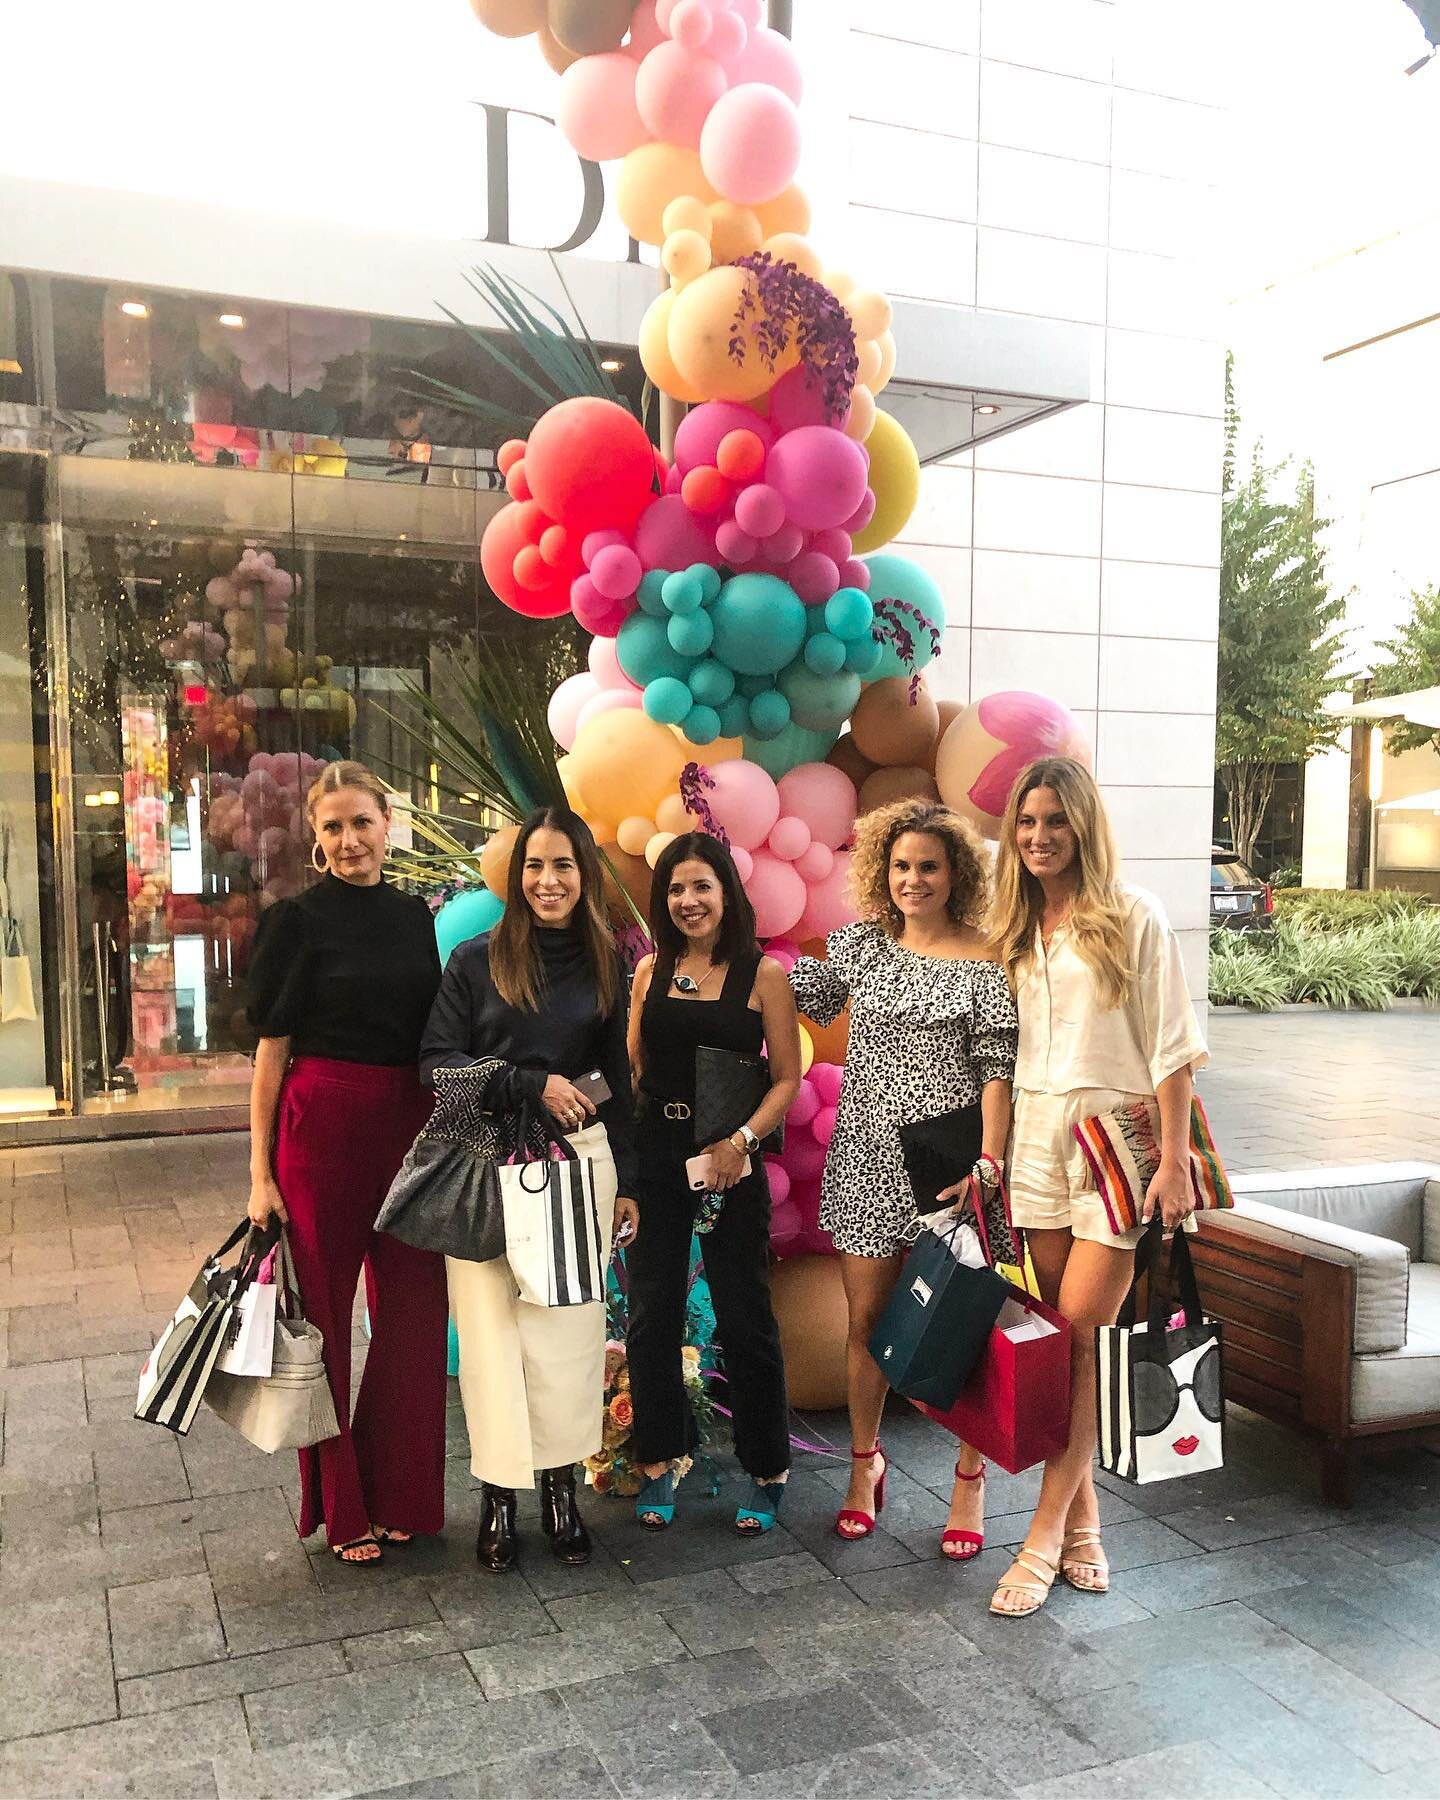 Last weekend we celebrated Mexico&rsquo;s Independence Day in a very stylish event at River Oaks District!
﻿
﻿First we strolled around the district&rsquo;s amazing stores where Davidoff, Dior and Diptyque showed us their awesome products and new coll